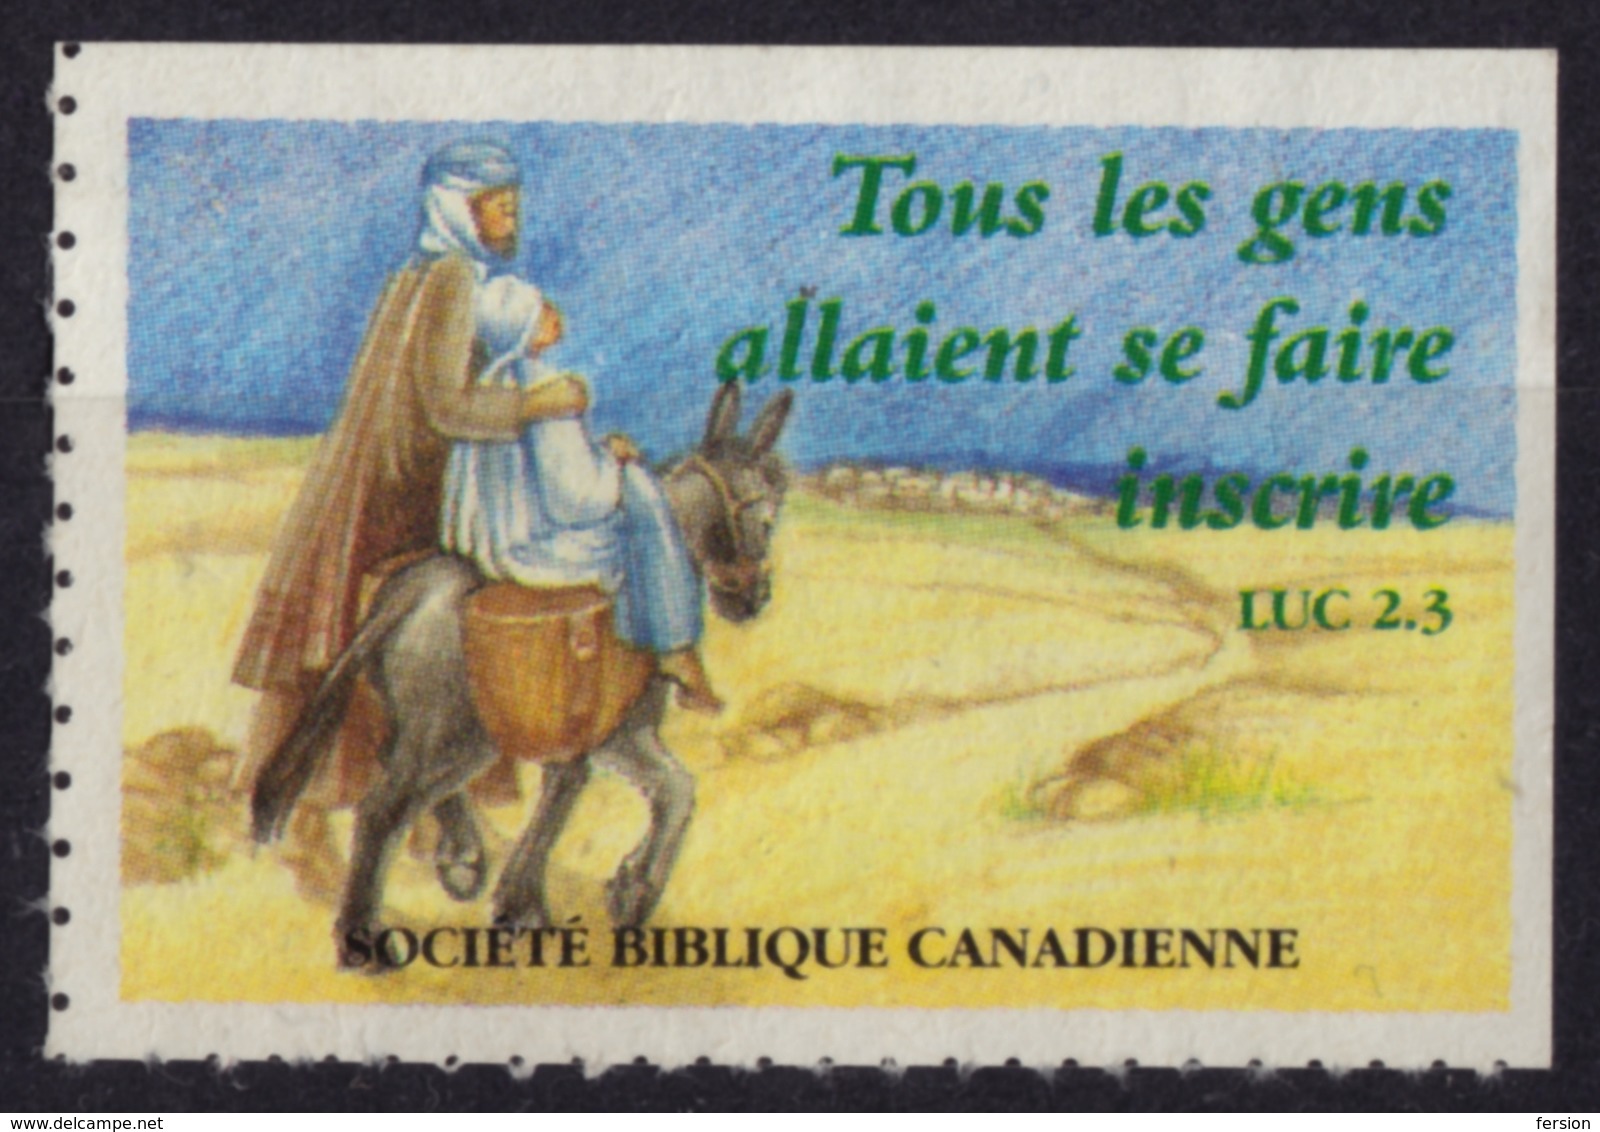 CANADA Bible Society / Christianity - Charity Stamp / Label / Cinderella / Vignette  - Used - Mary Joseph Donkey - Anes